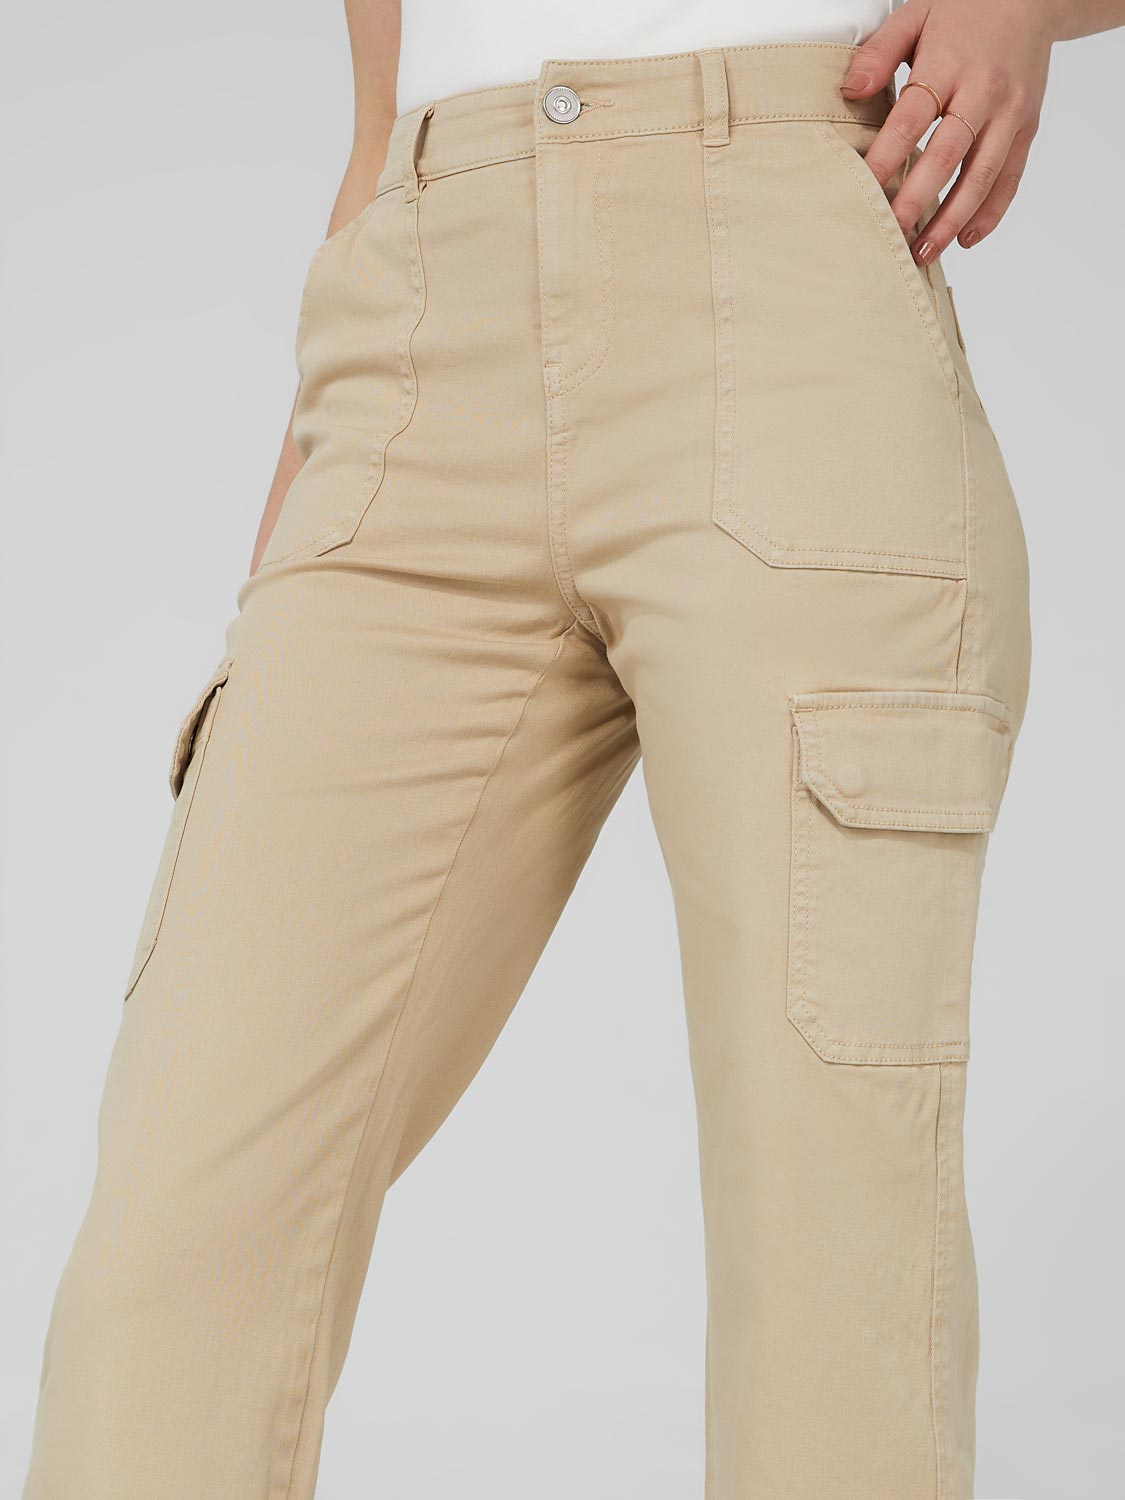 High waisted Cargo Pants With Belt with 25% discount!